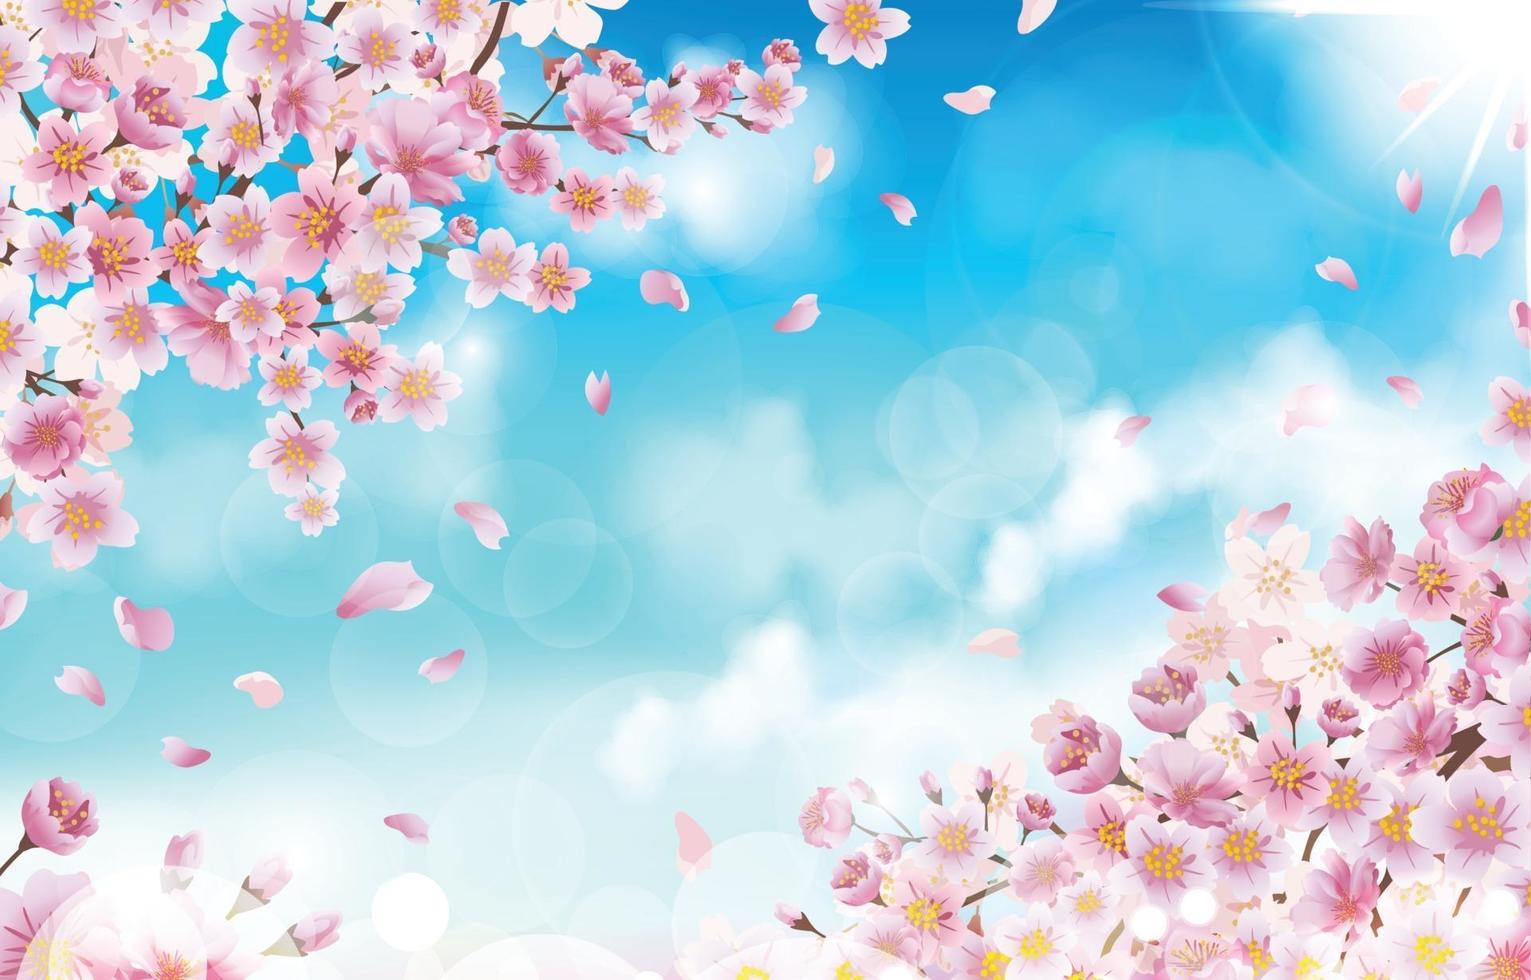 Beautiful Cherry Blossom with Petals Background Concept vector